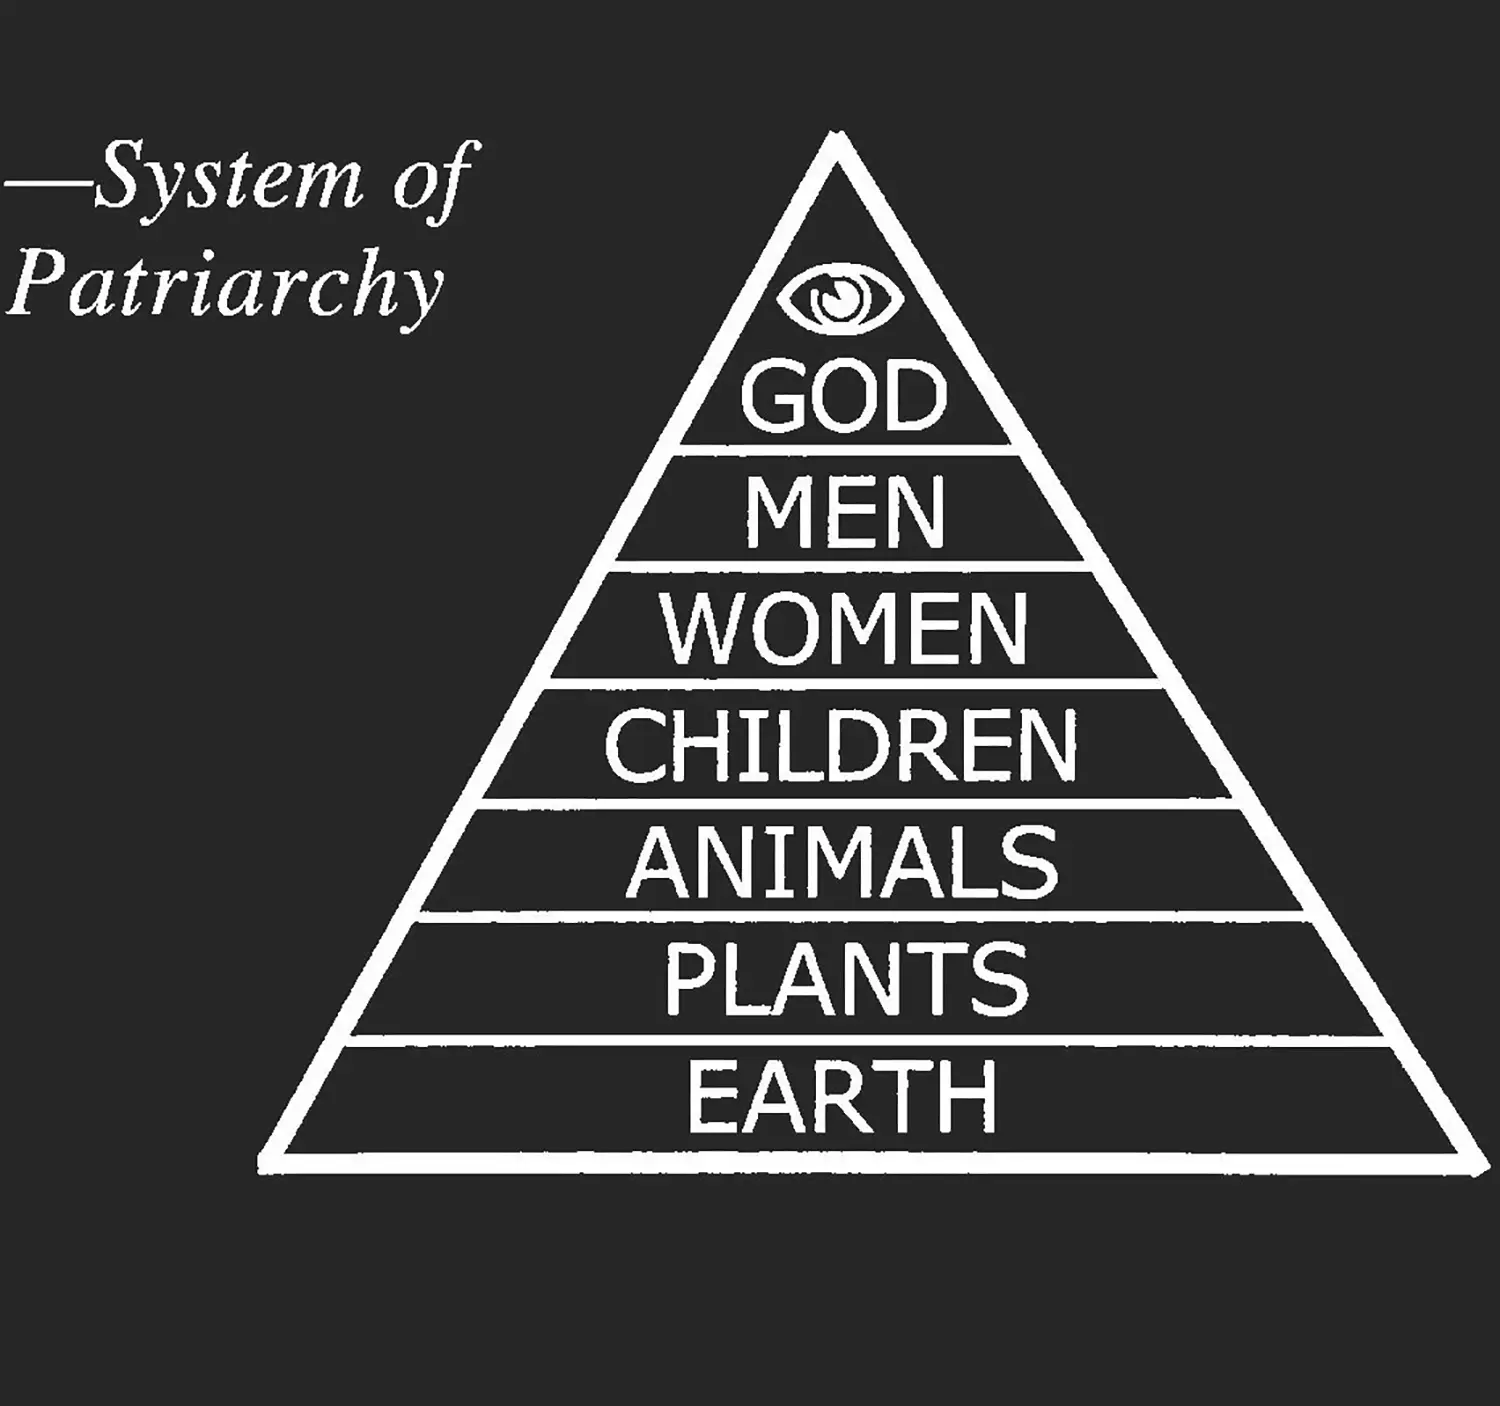 A diagram labeled “System of Patriarchy” shows a pyramidal hierarchy containing, in descending order: God, Men, Women, Children, Animals, Plants, Earth.